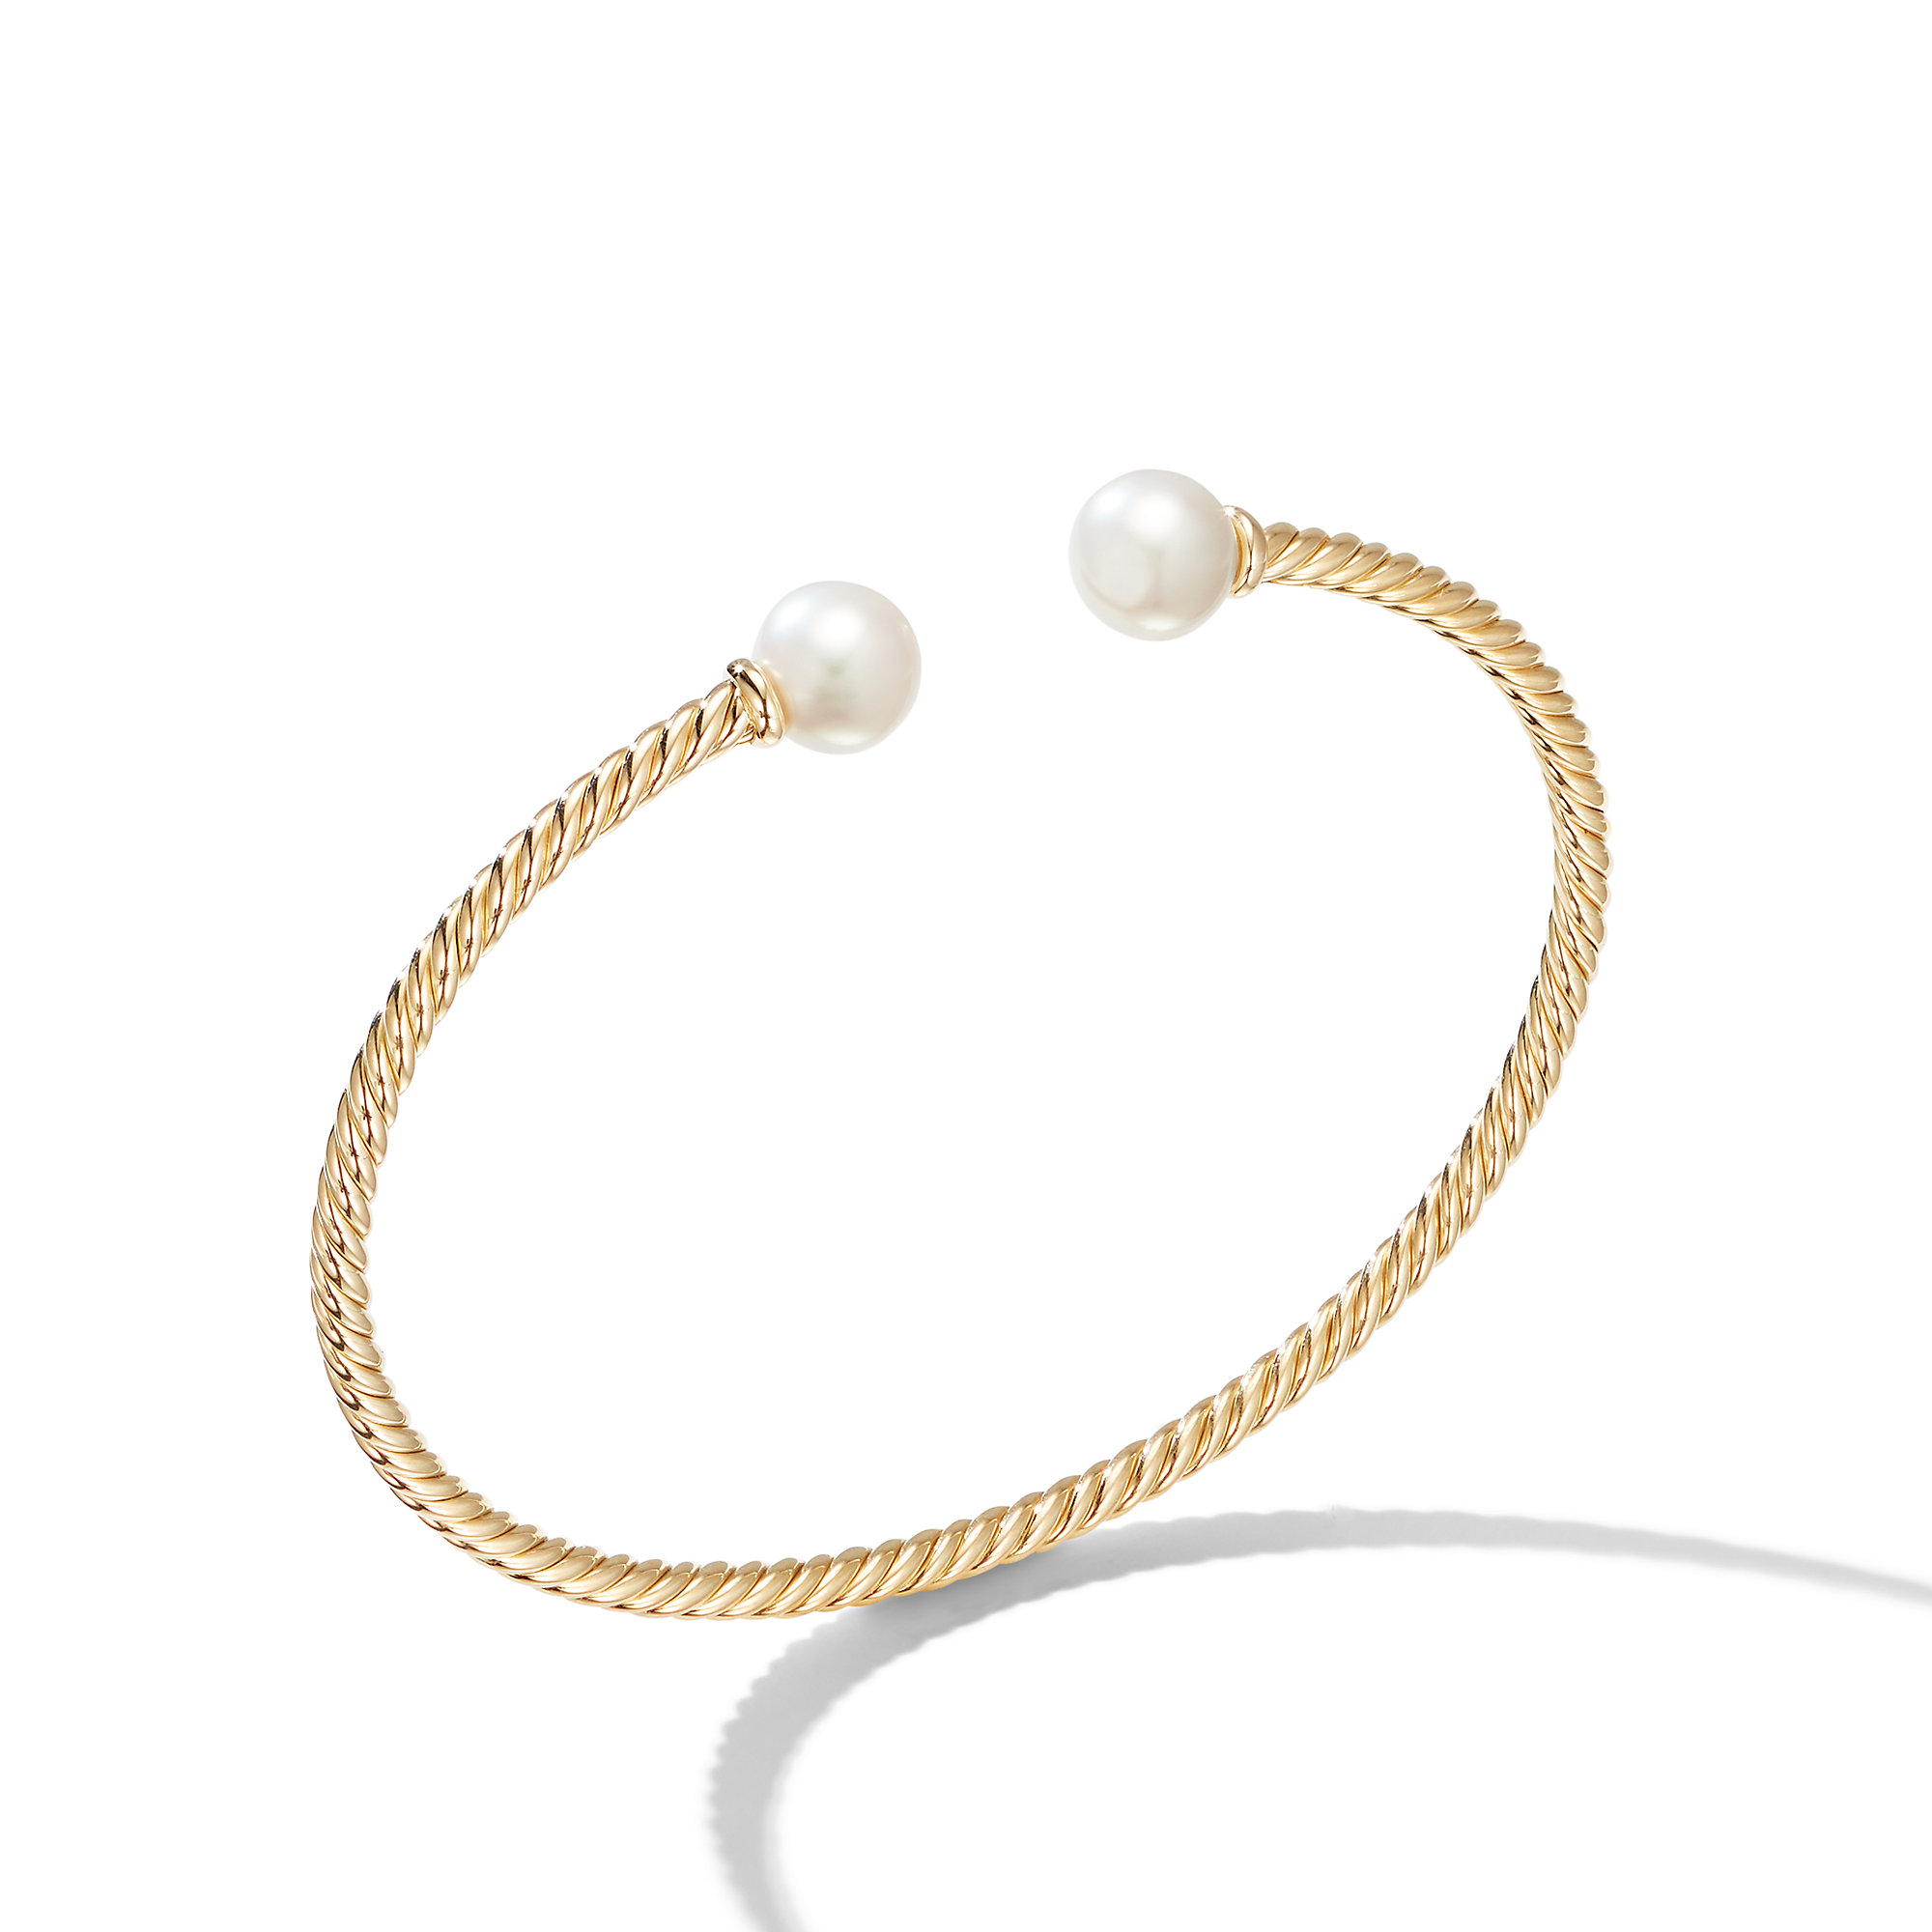 Solari Cablespira® Bracelet in 18K Yellow Gold with Pearls, 2.6mm